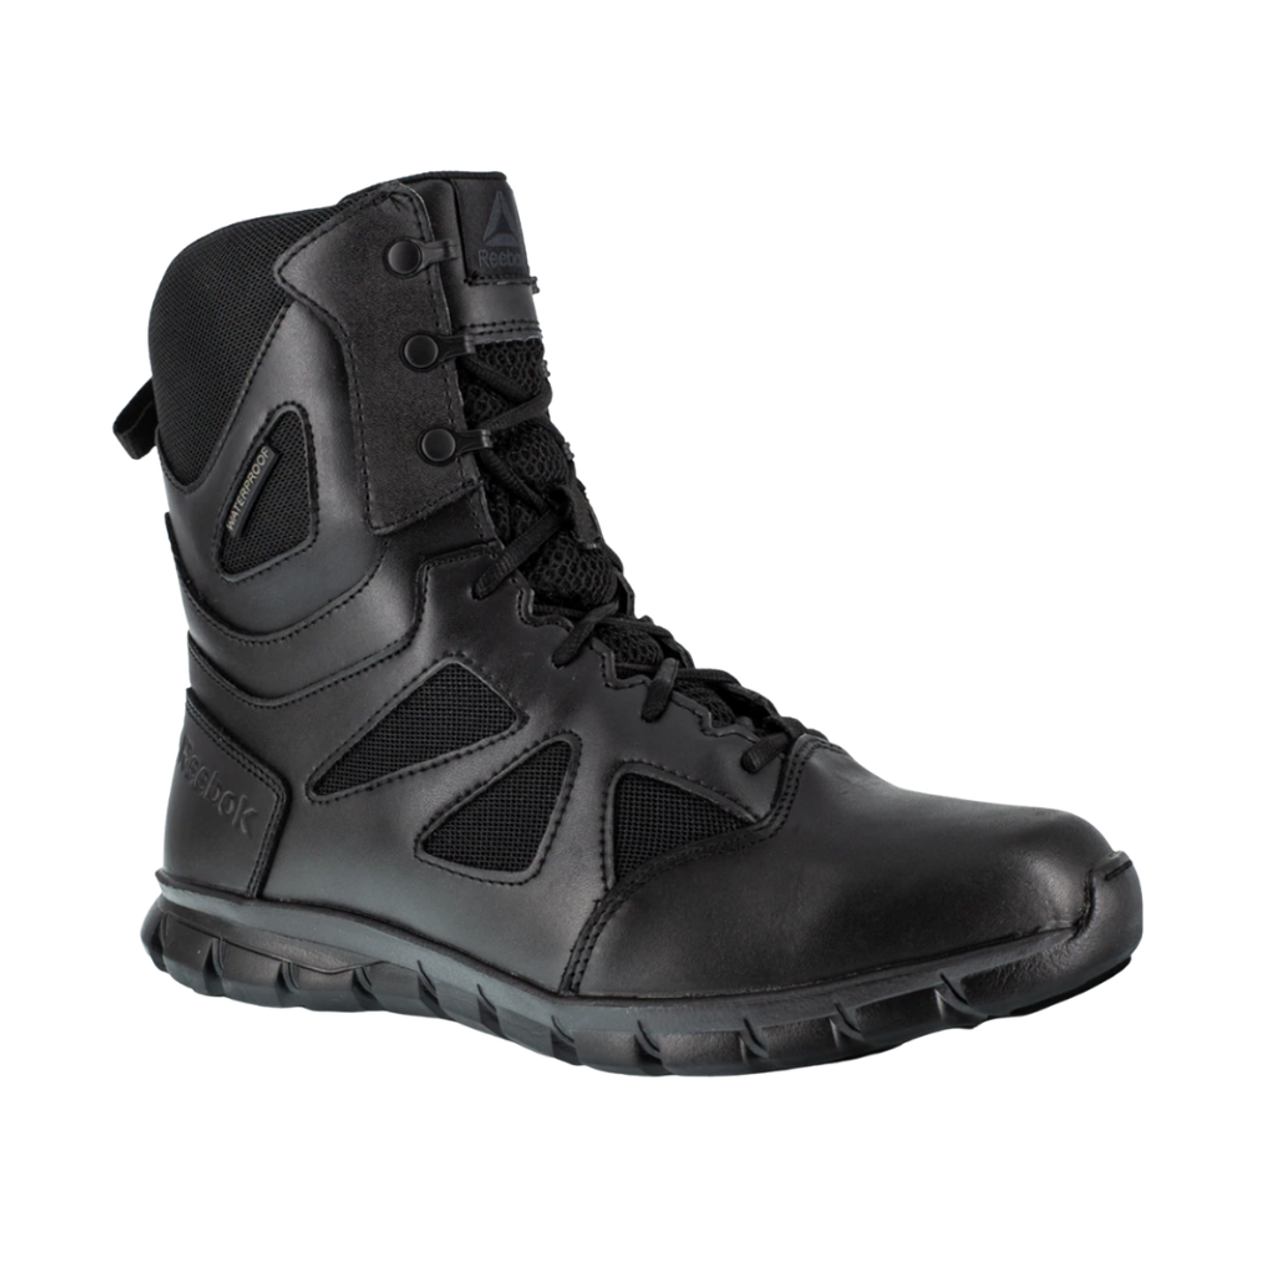 Men's Sublite Cushion Tactical | 8" Tactical Waterproof Boot with Side Zip | Display Sample